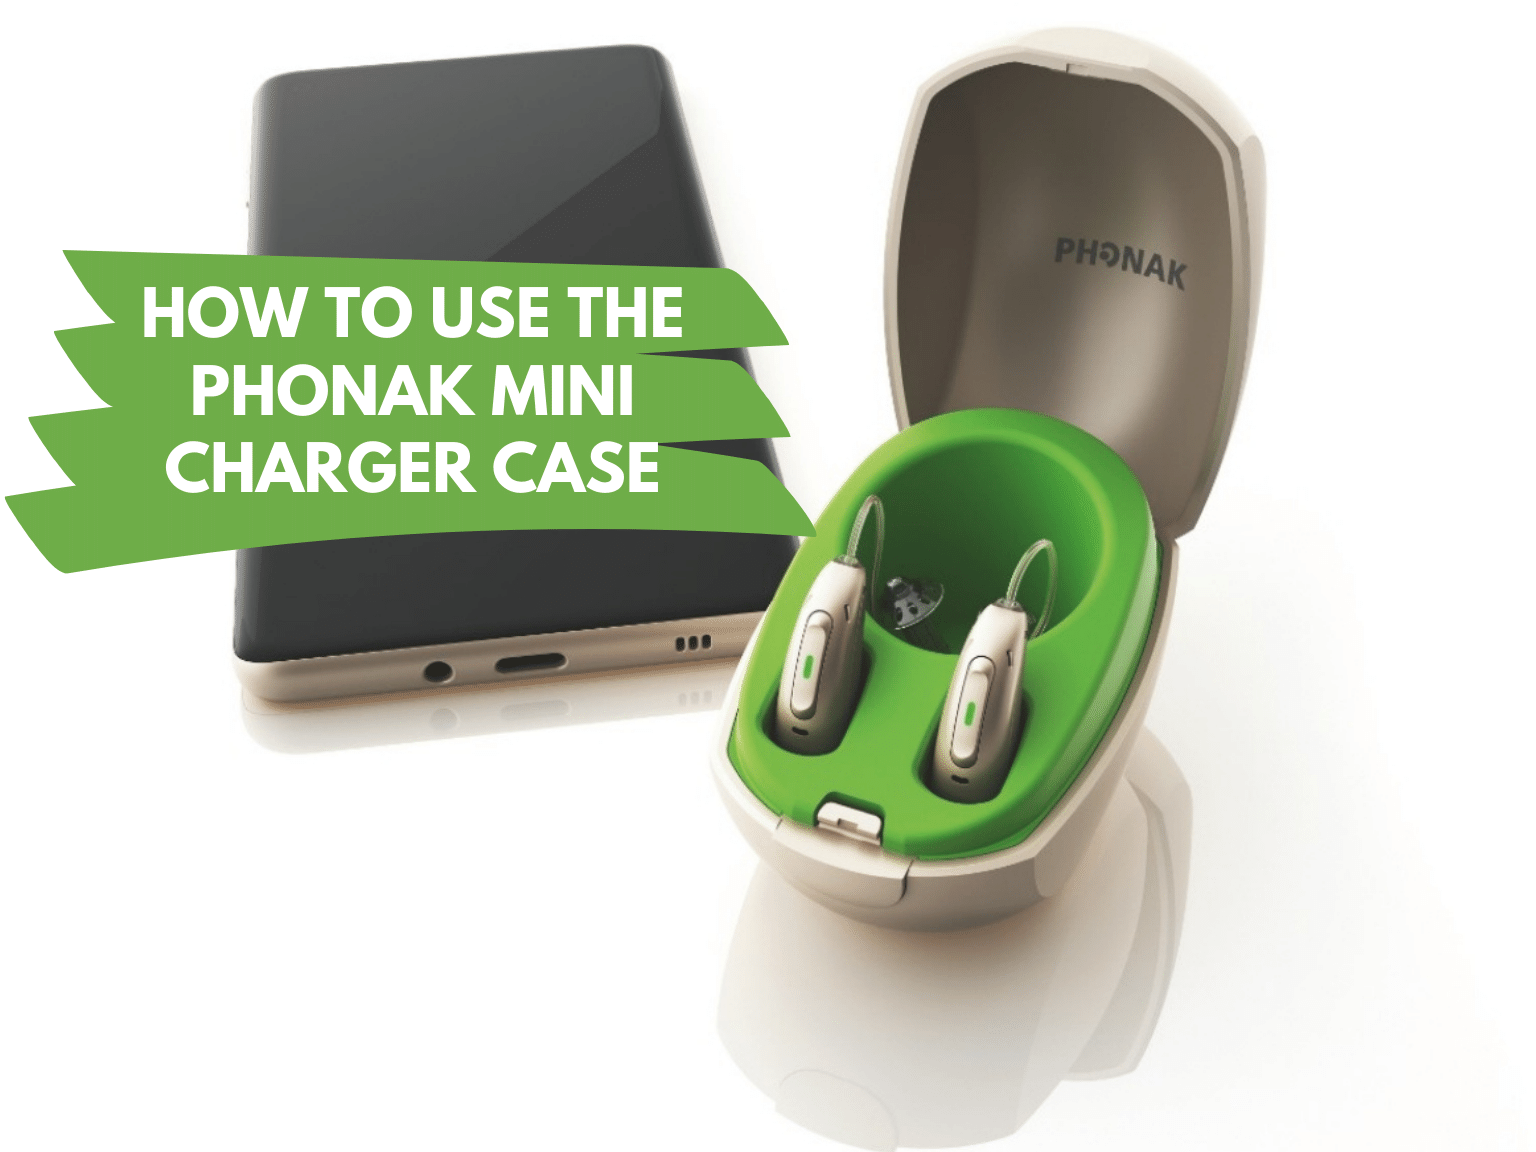 How to use Phonak charger case